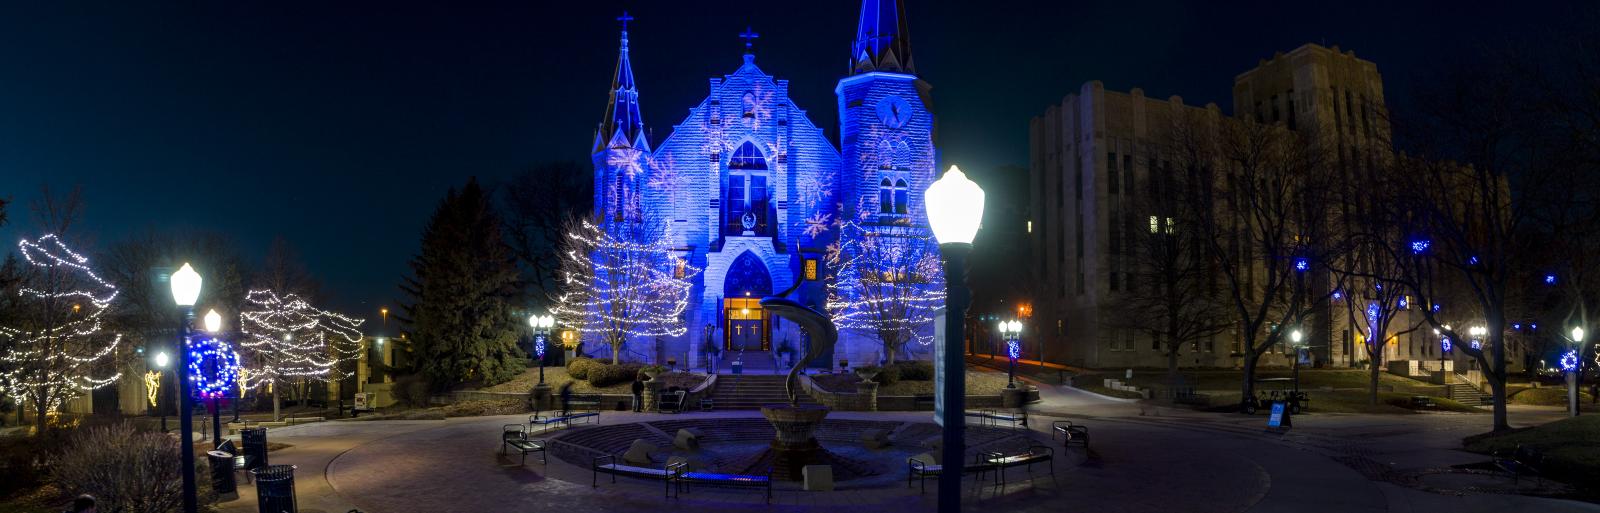 St. Johns at Christmas time with blue lights Creighton University